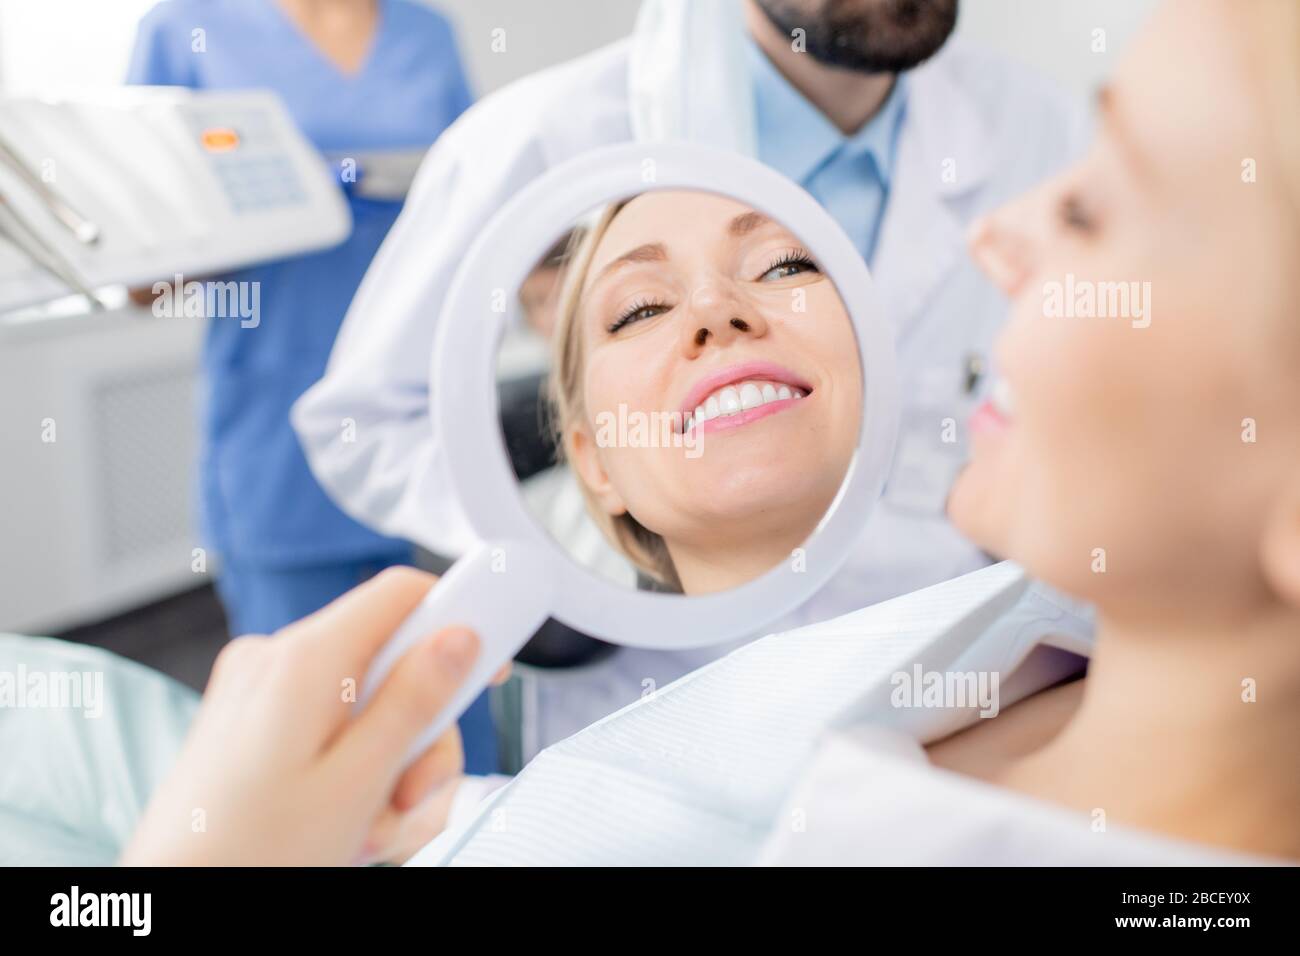 Reflection in mirror of healthy smile of pretty young smiling female patient of dental clinics after whitening teeth procedure by her dentist Stock Photo